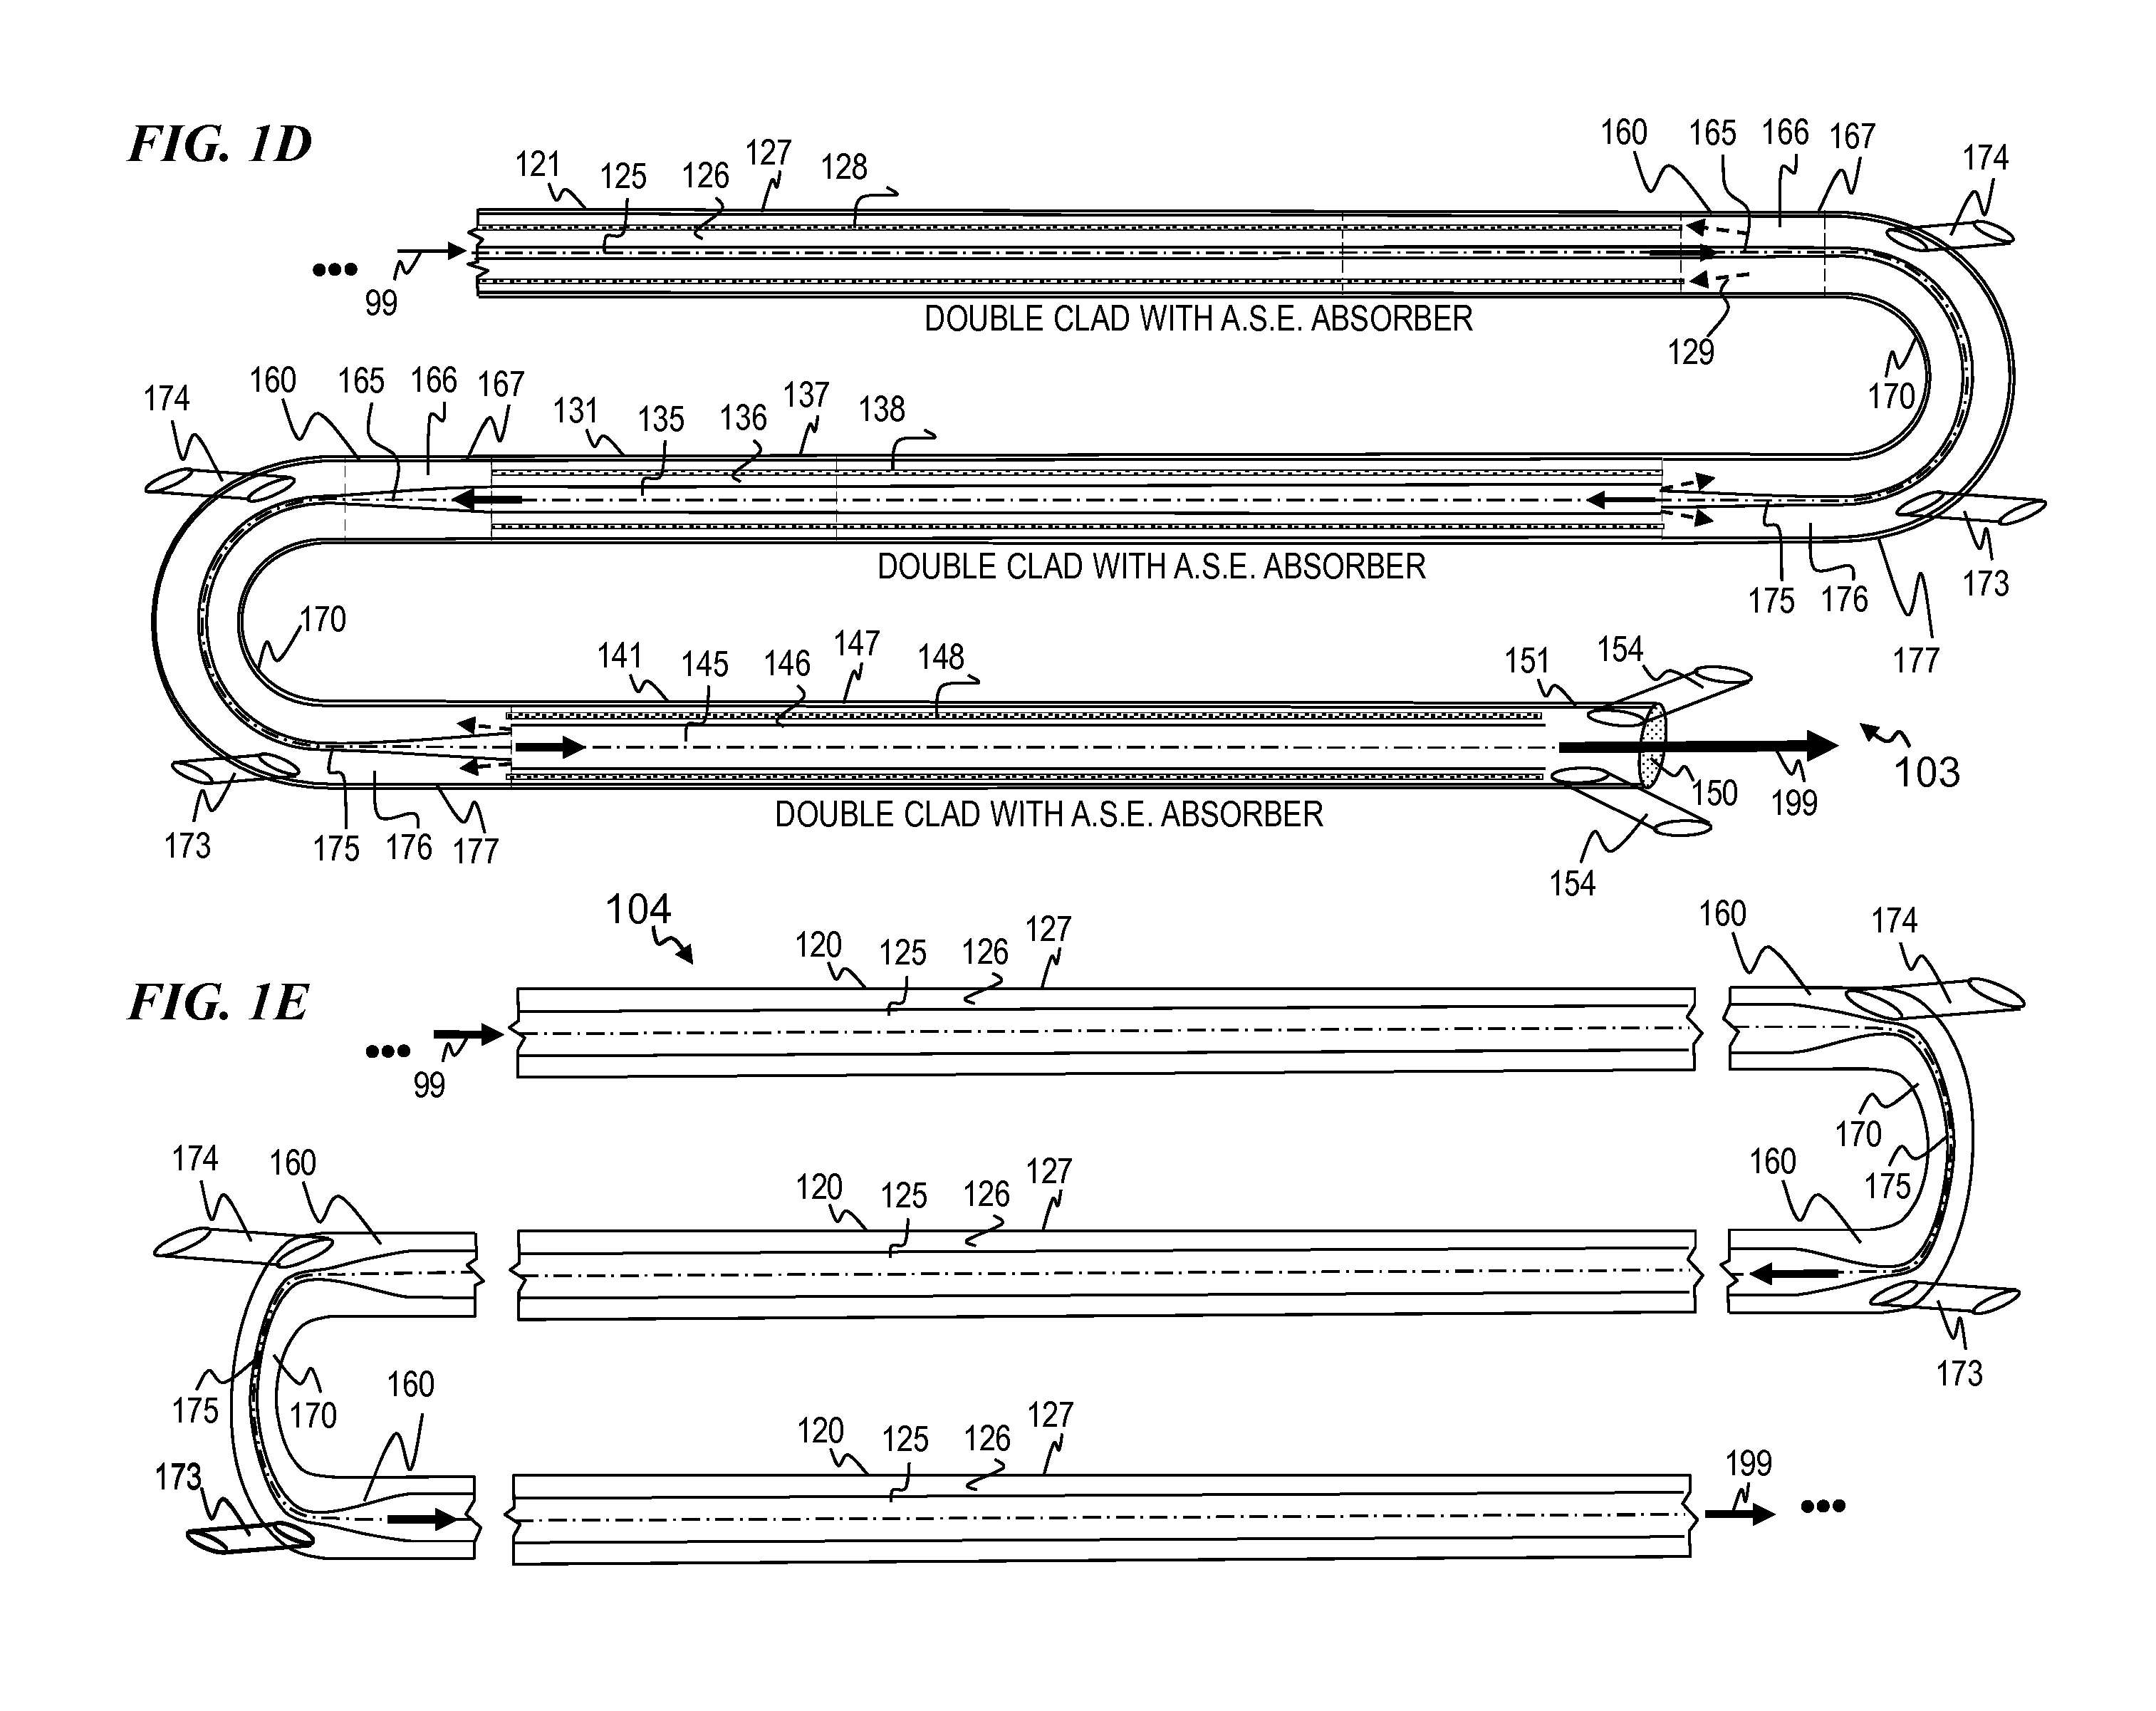 Apparatus and method for optical gain fiber having segments of differing core sizes